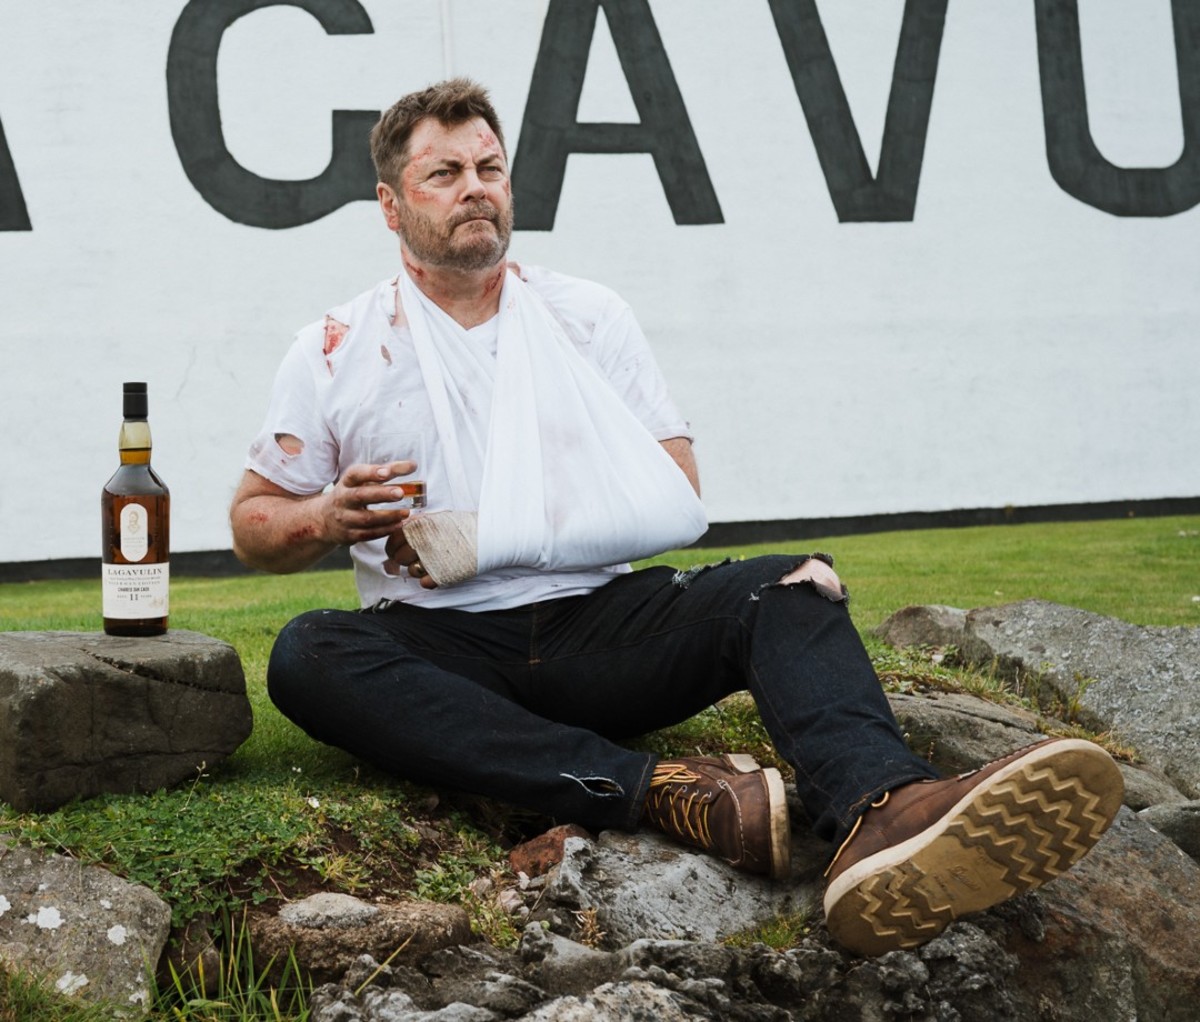 Battered man sitting on ground with bottle of Lagavulin Offerman Edition: Charred Oak Cask